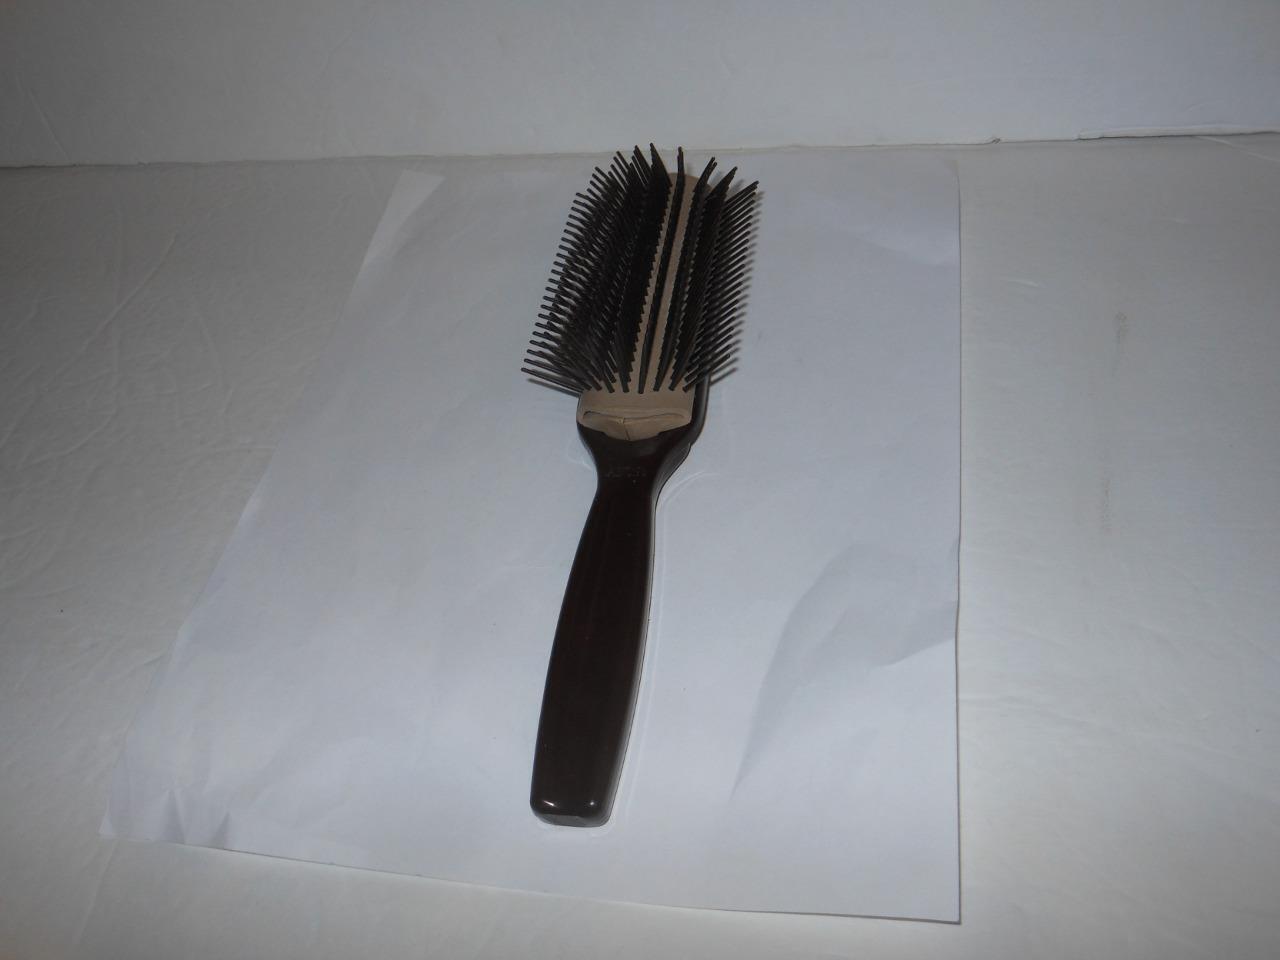 RARE VINTAGE AVON NATURAL STYLING BRUSH REMOVABLE HEAD COMB